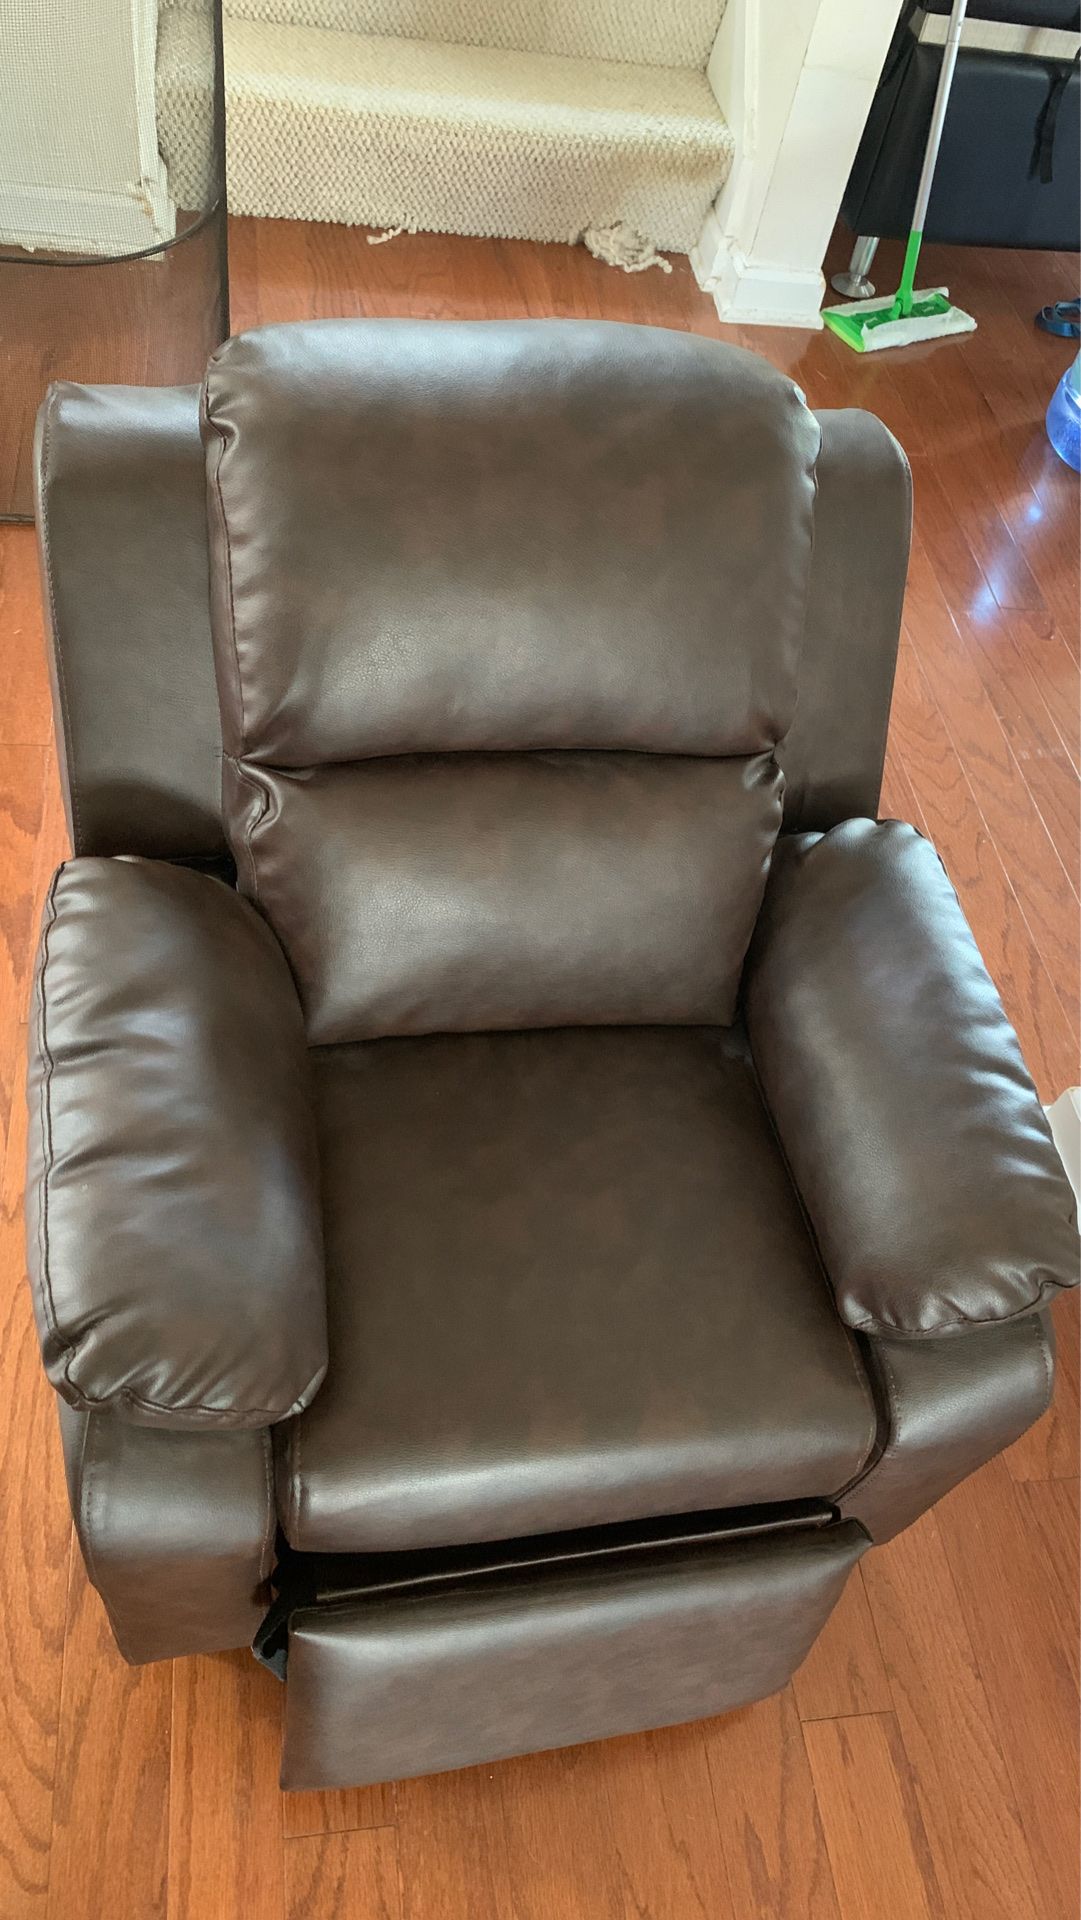 Kids sofa recliner brown leather, excellent condition